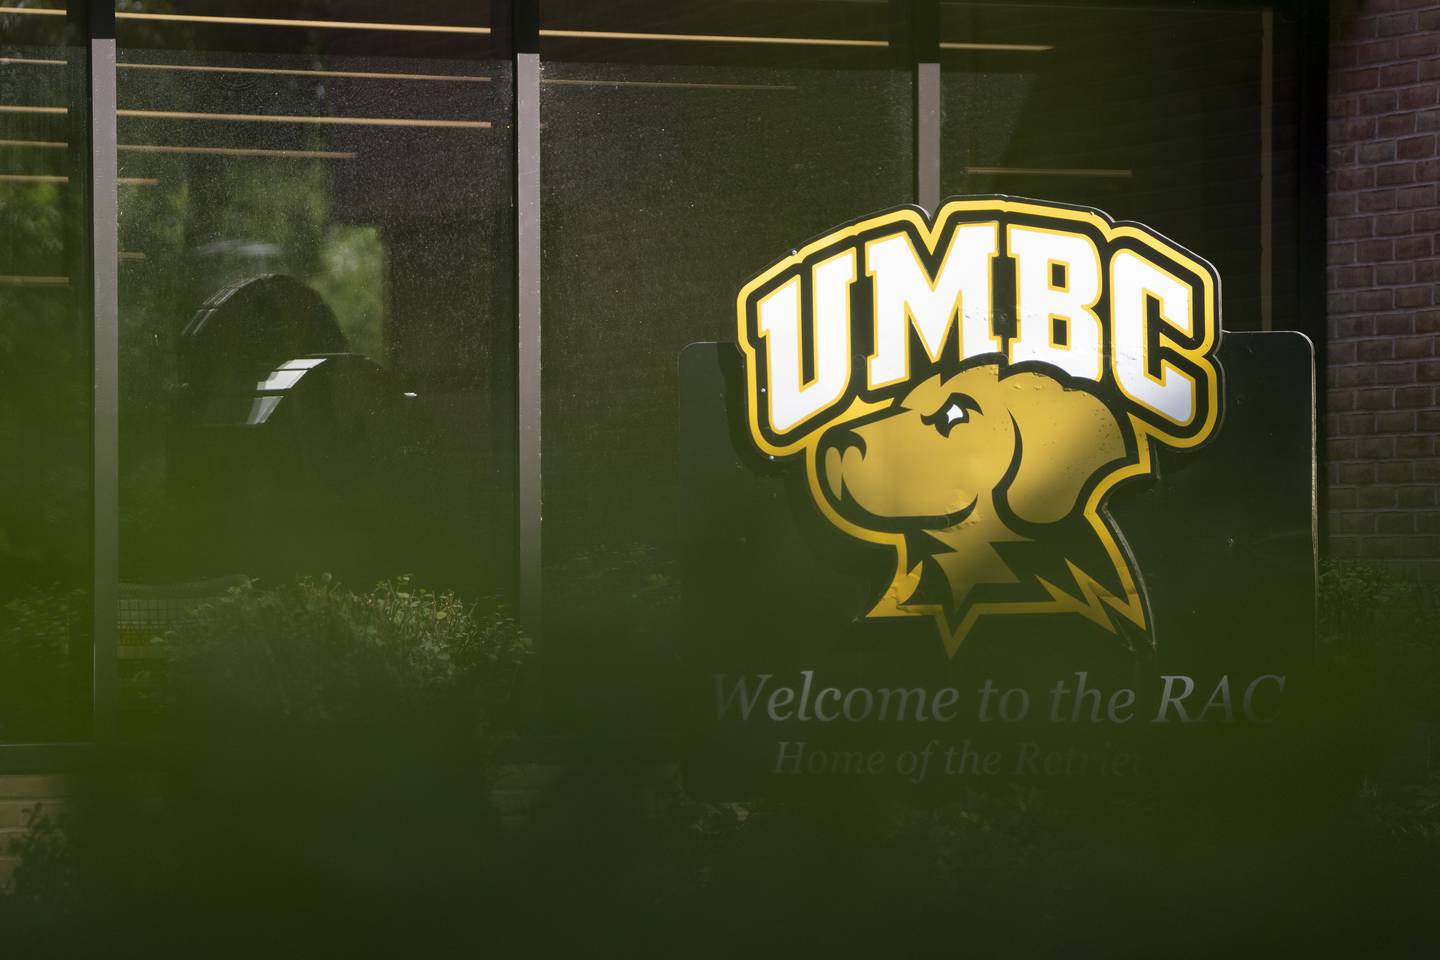 The UMBC mascot and logo outside of the Retriever Activities Center.